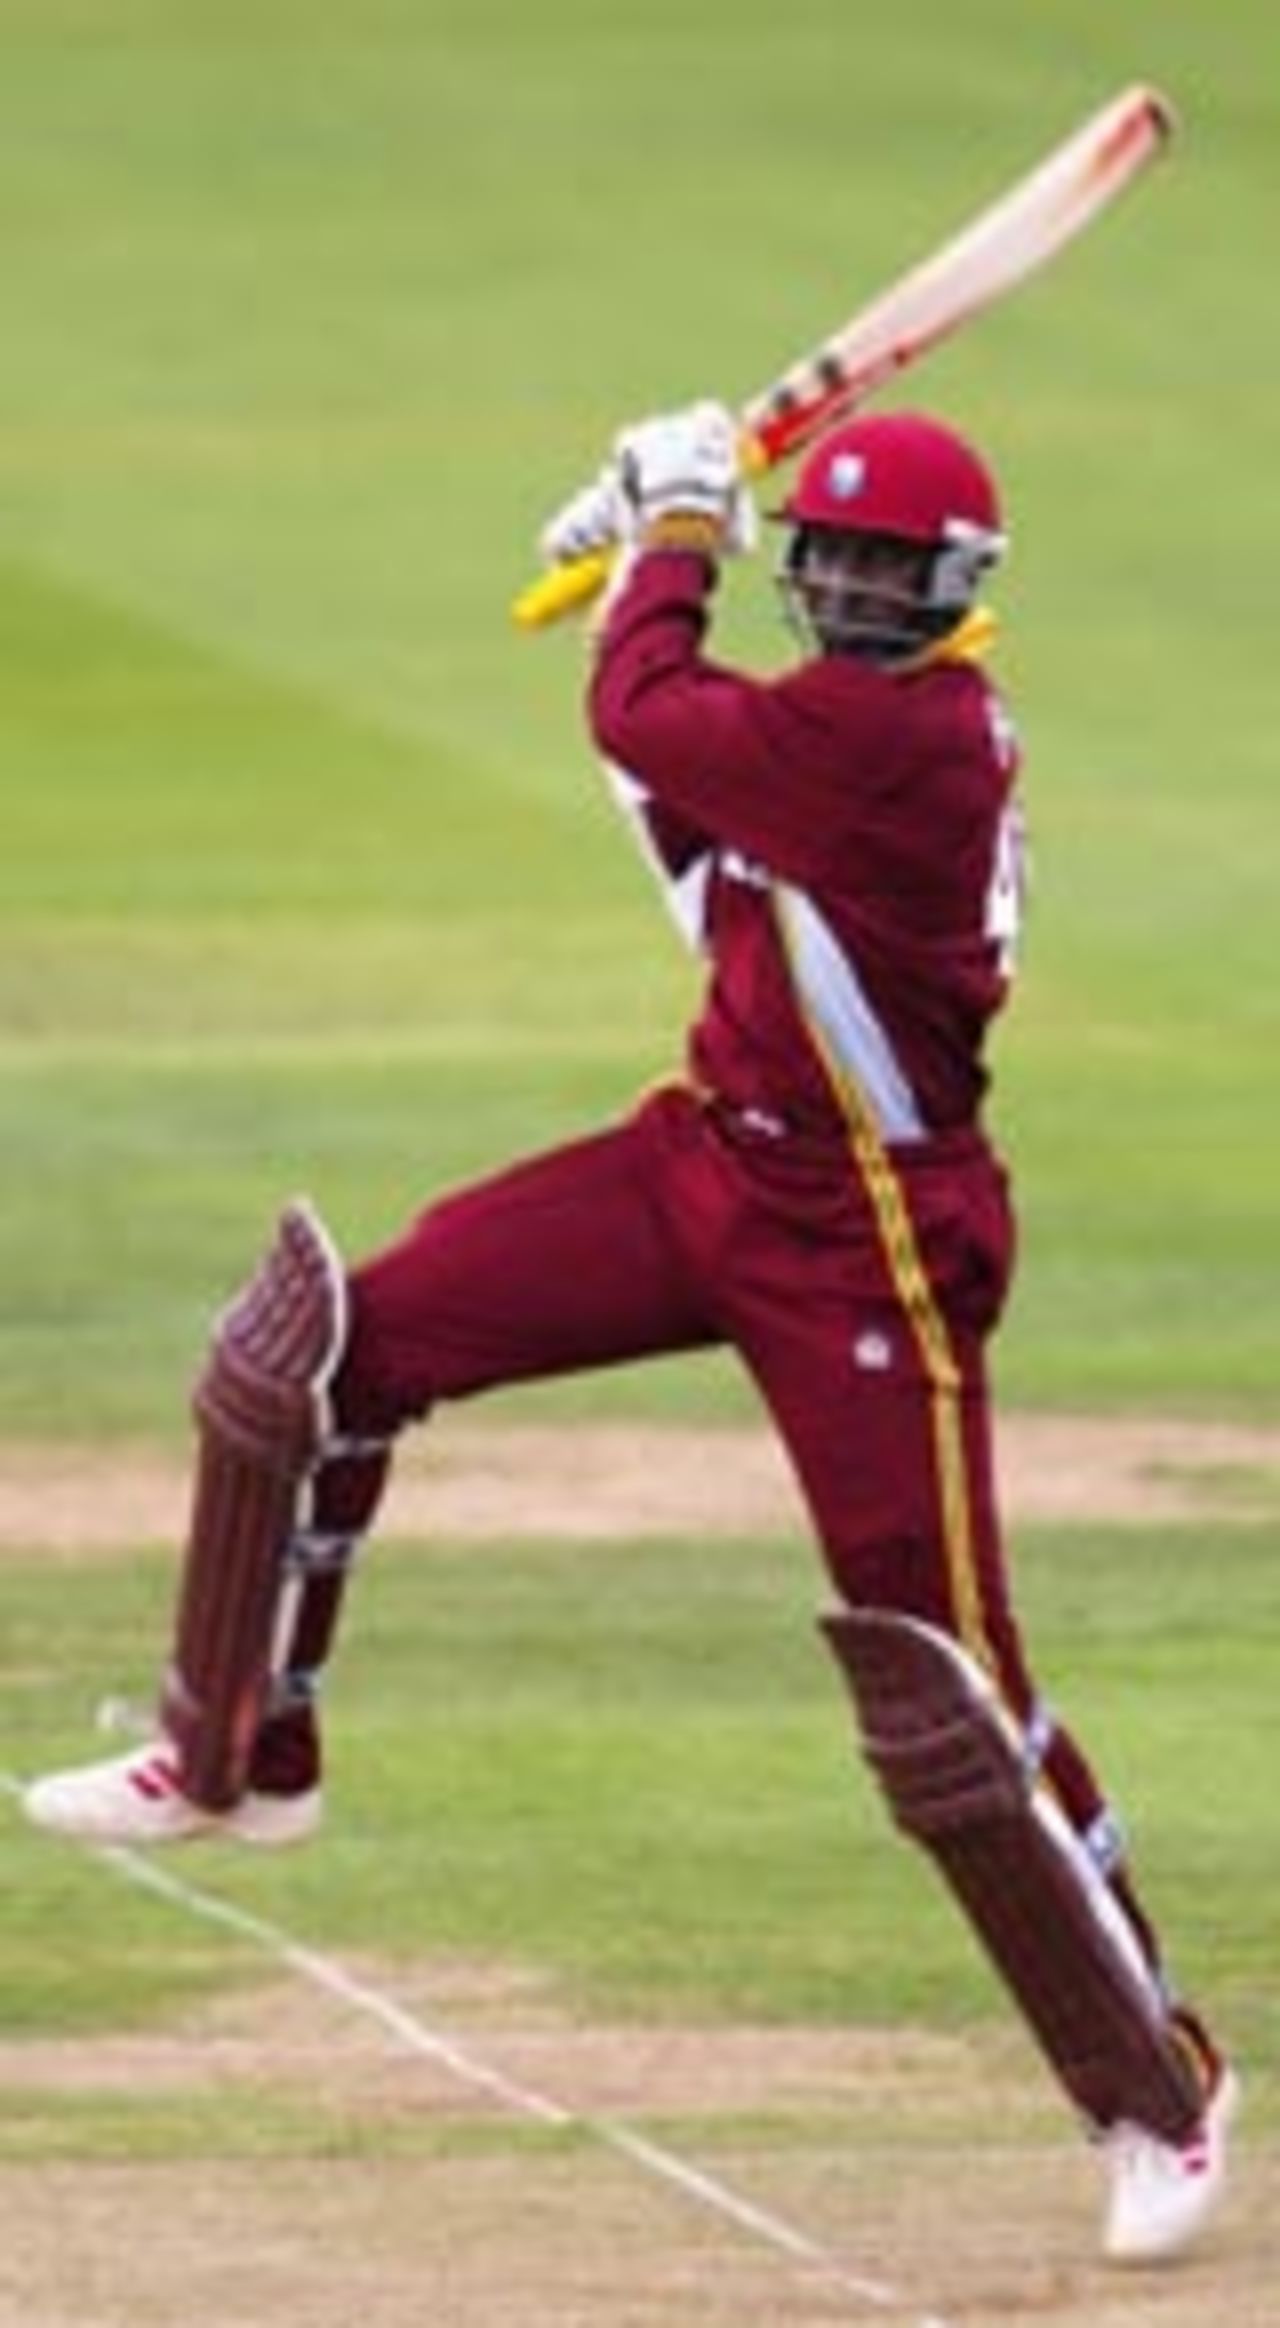 Chris Gayle in typically aggressive mode against England, England v West Indies, NatWest Series, Lord's, July 6 2004